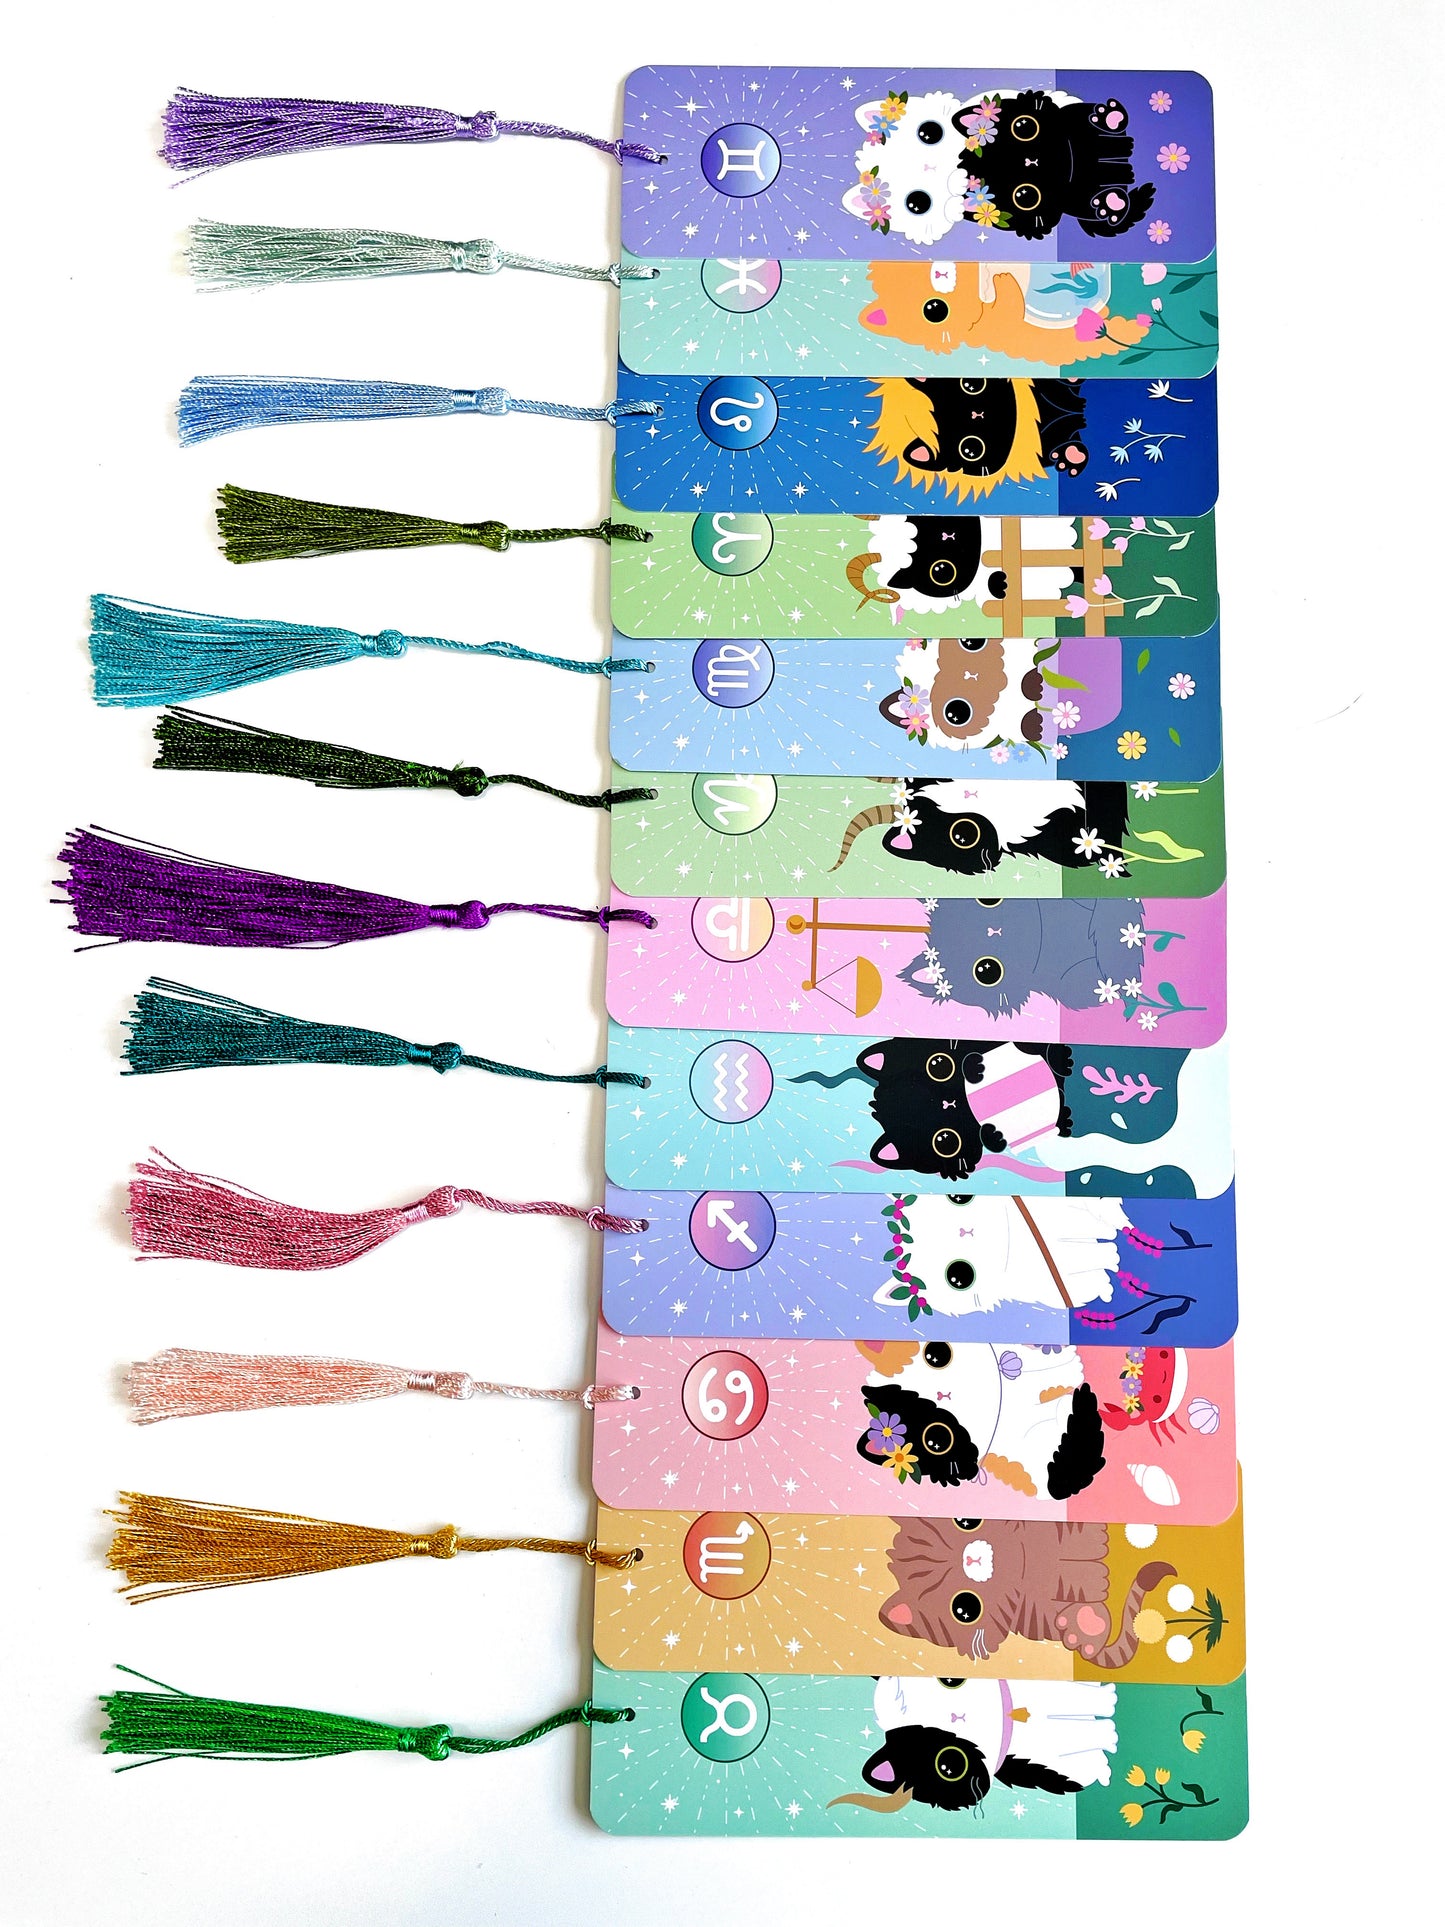 All 12 zodiac sign bookmarks 